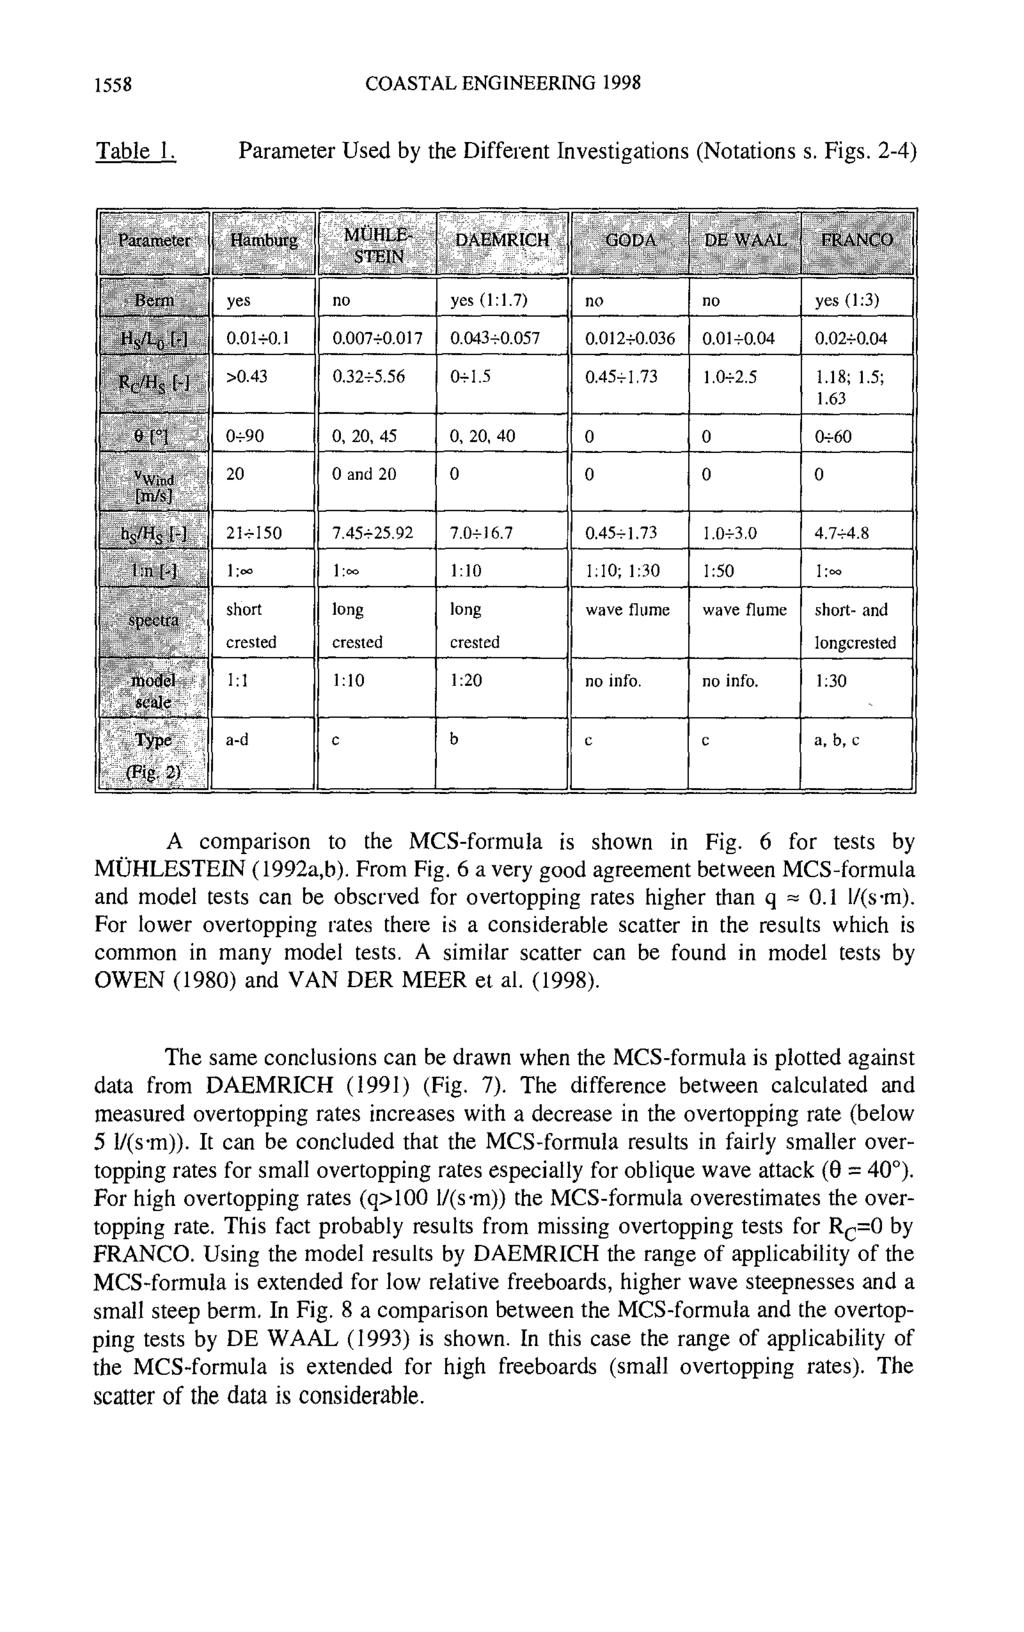 1558 COSTL ENGINEERING 1998 Table 1. Parameter Used by the Different Investigations (Notations s. Figs. 2-4) 1 ['j-illl-lfl Hamburg MUHLE- STEIN DEMRICH GOD. DE WL FRV " i!.._ i! \^... i IM..H. 1 R, IU - i u!